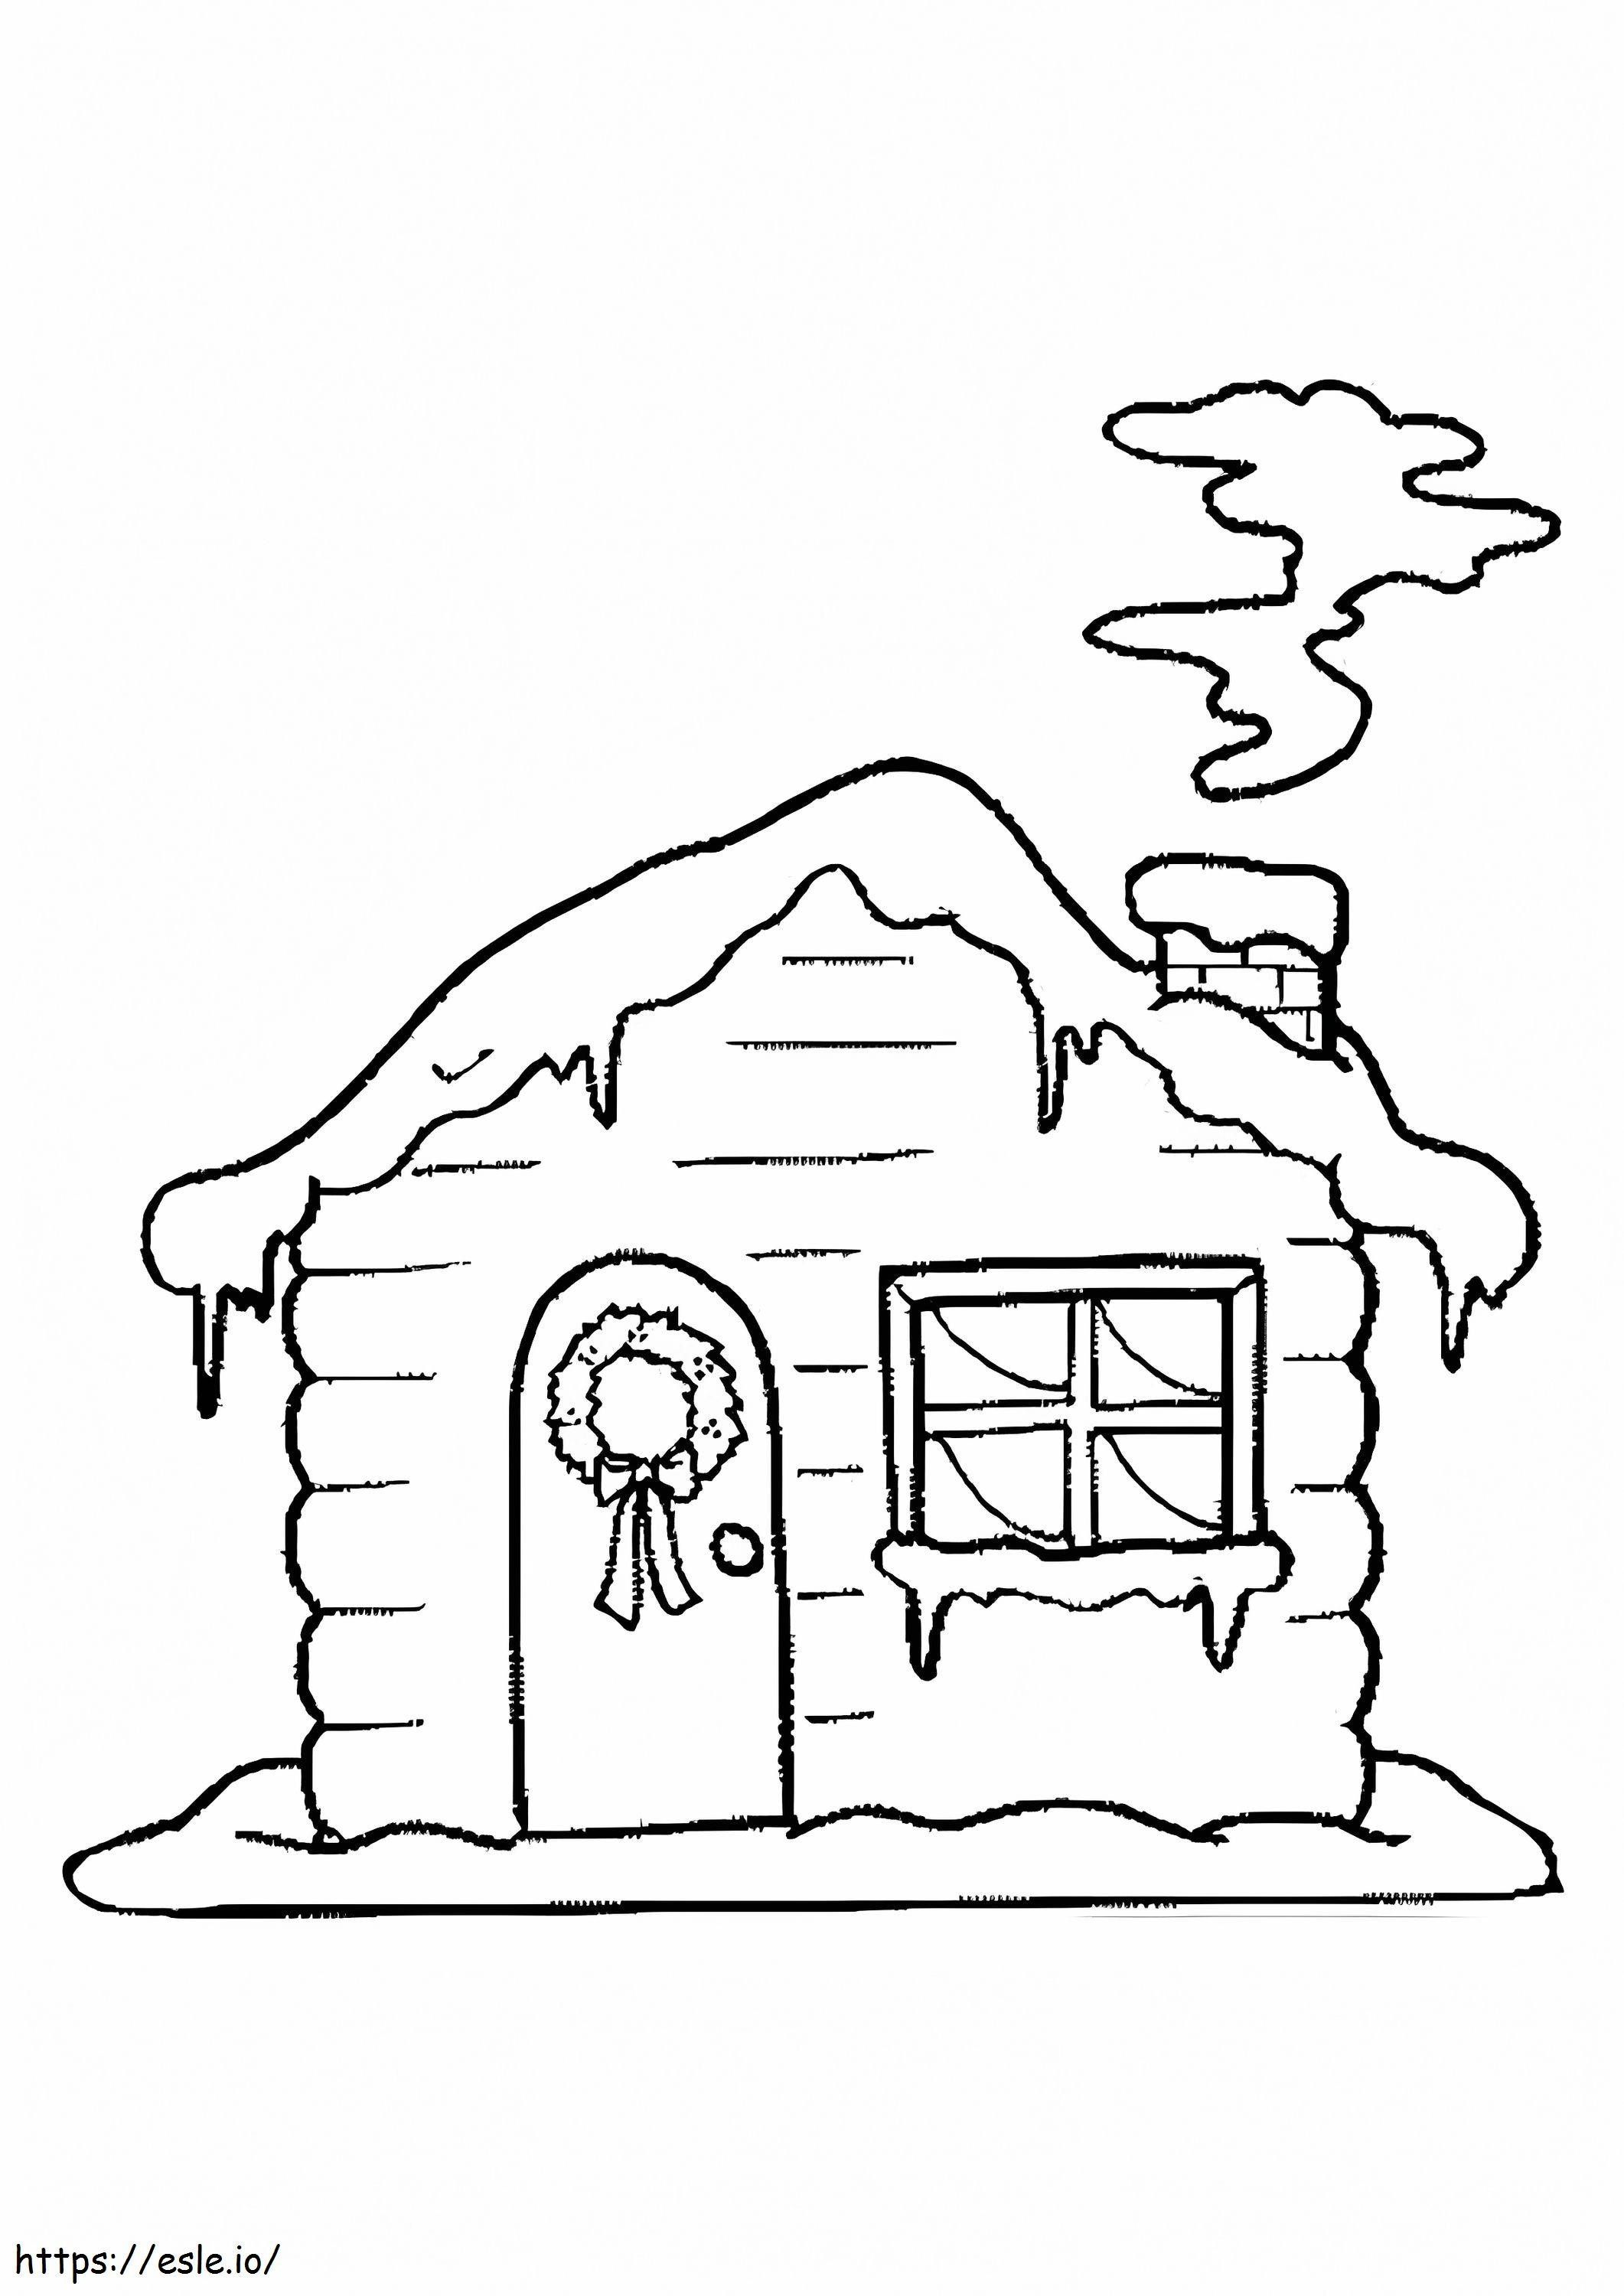 Cozy House coloring page